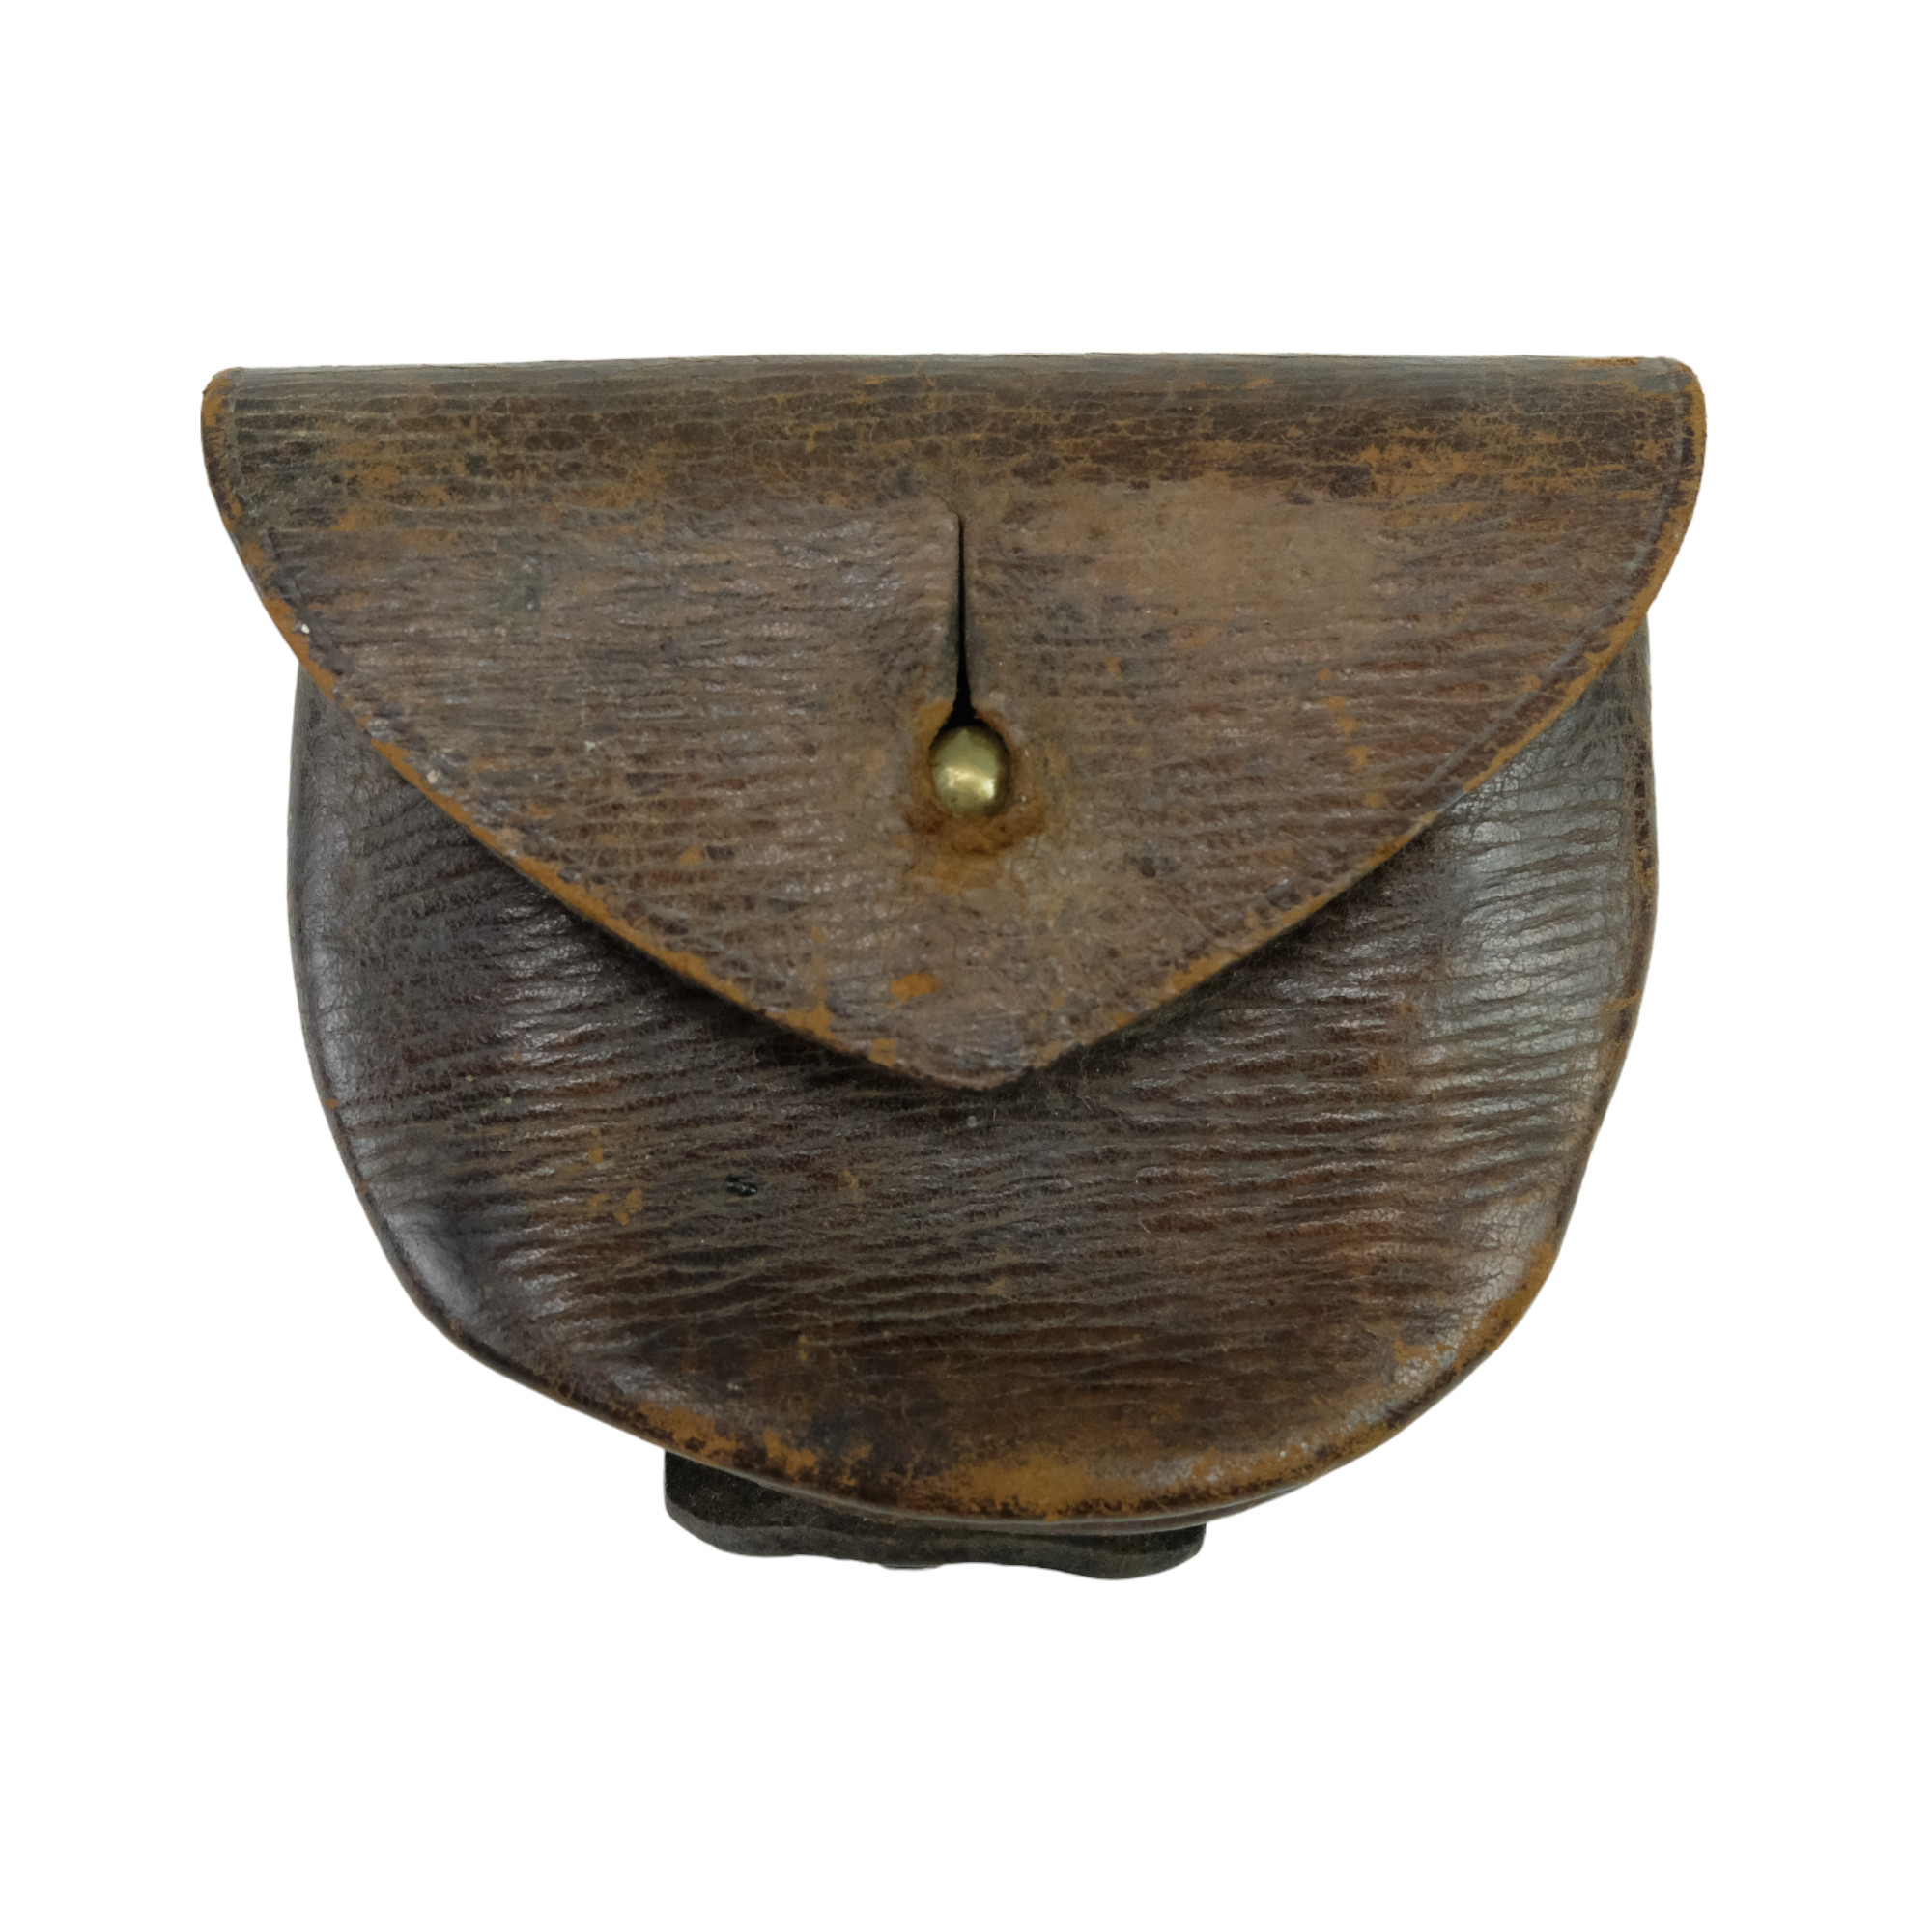 A Boer War British Army leather revolver ammunition pouch, dated 1900